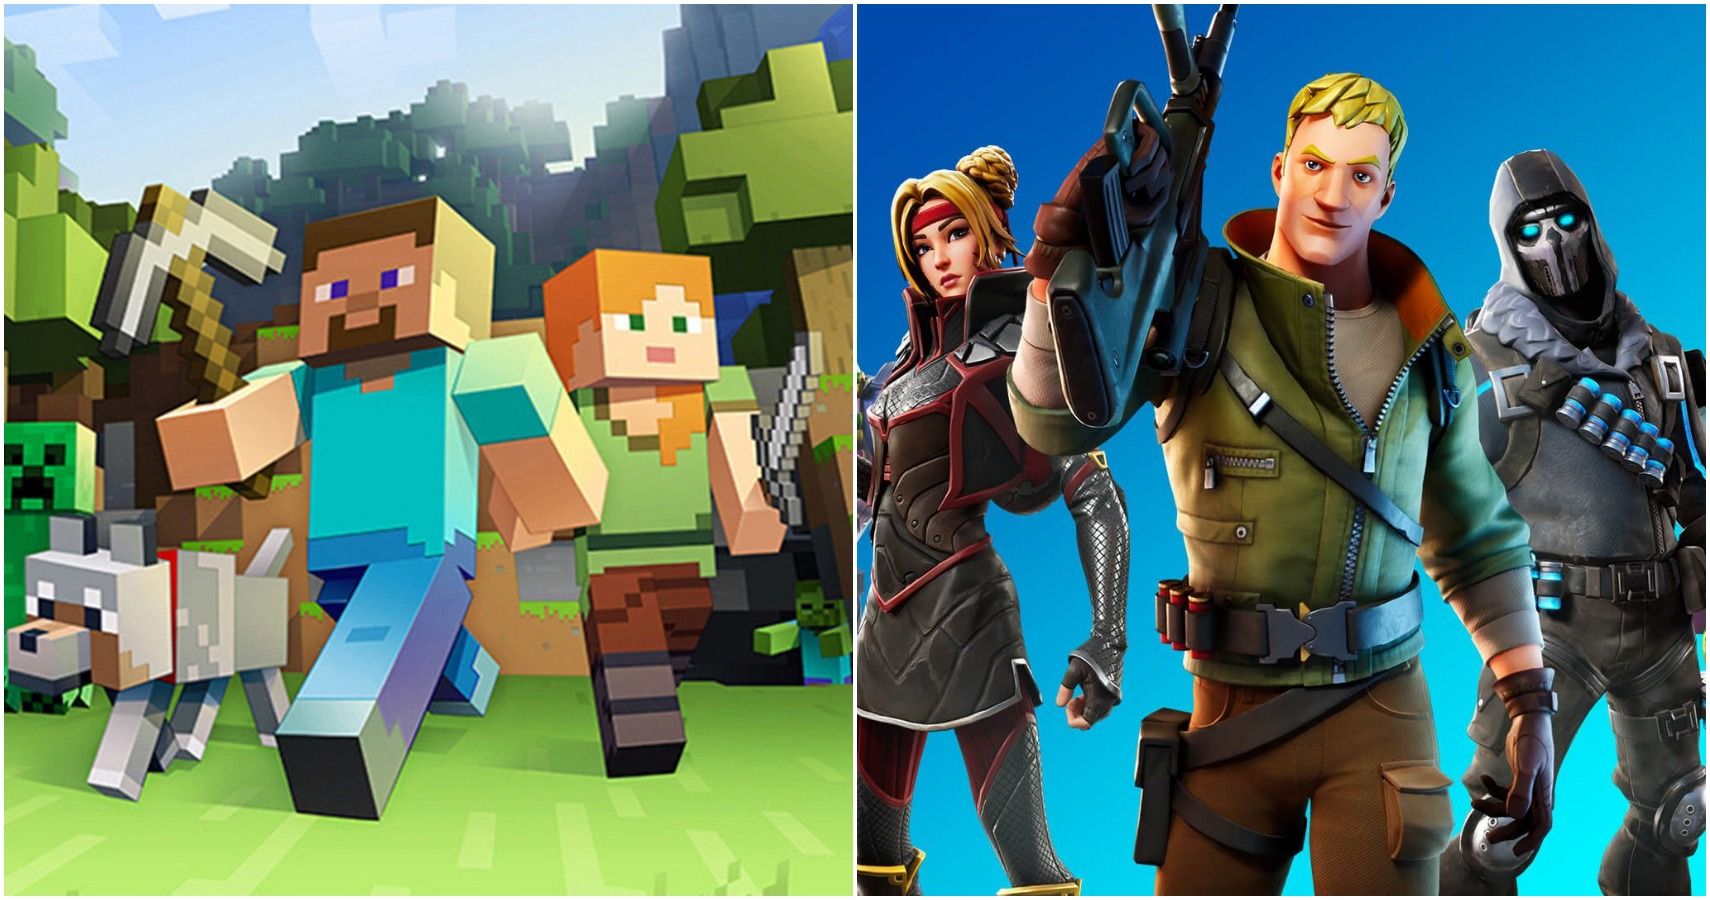 Minecraft And Fortnite Image Combined Fortnite Vs Minecraft Which Is The Most Important Game Of The Decade